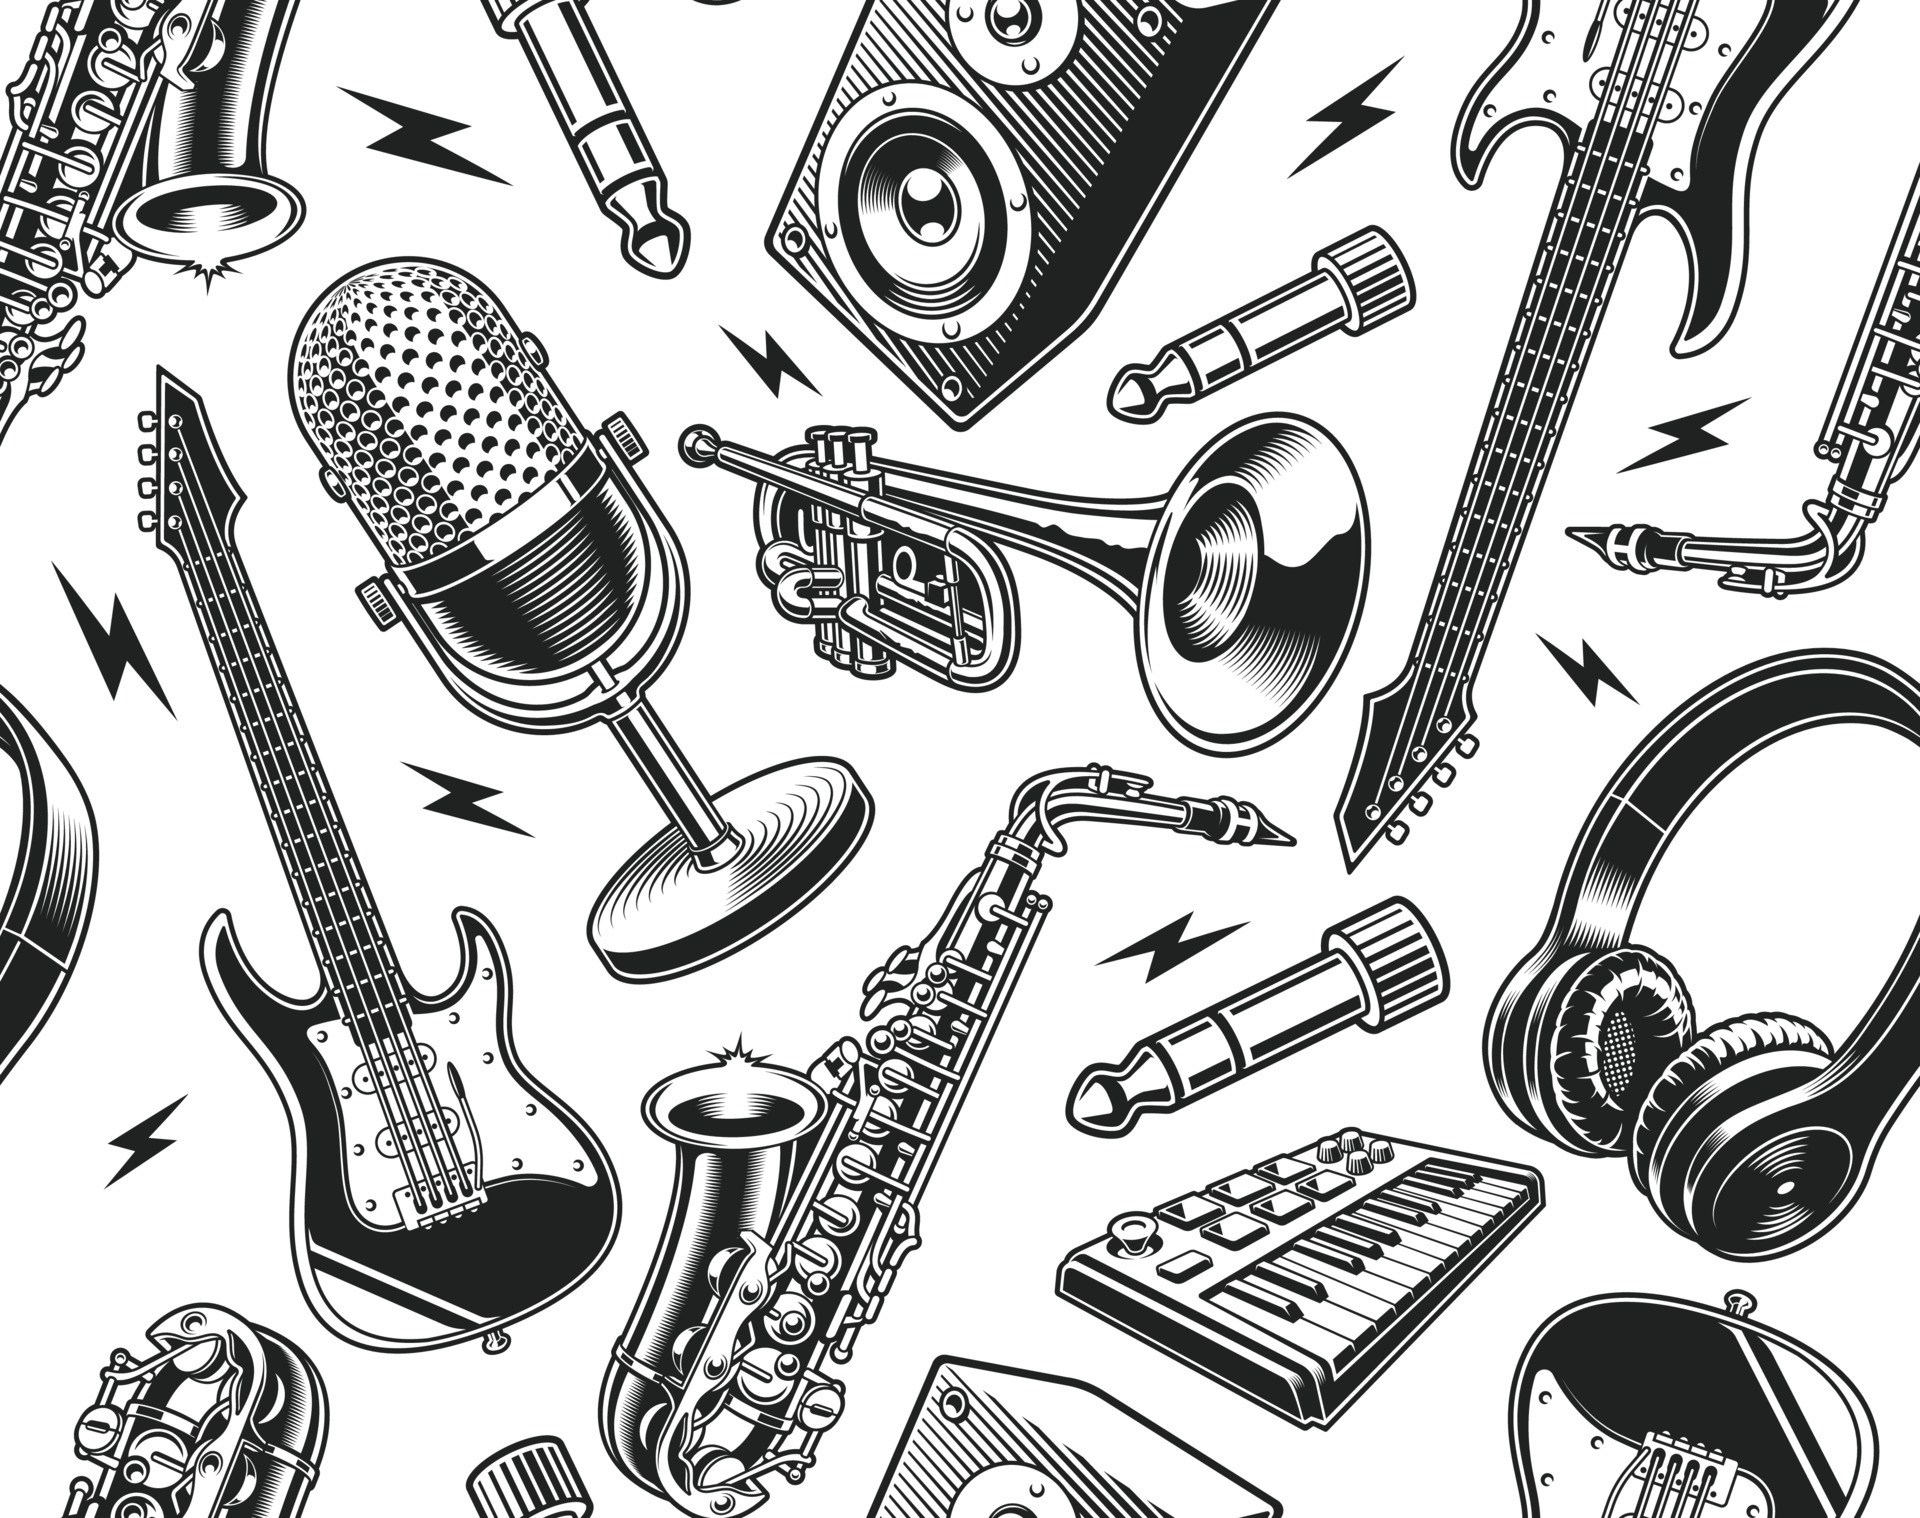 1920x1518 Music seamless background, this design can be used as wallpaper for a sound recording studio 5447462 Vector Art